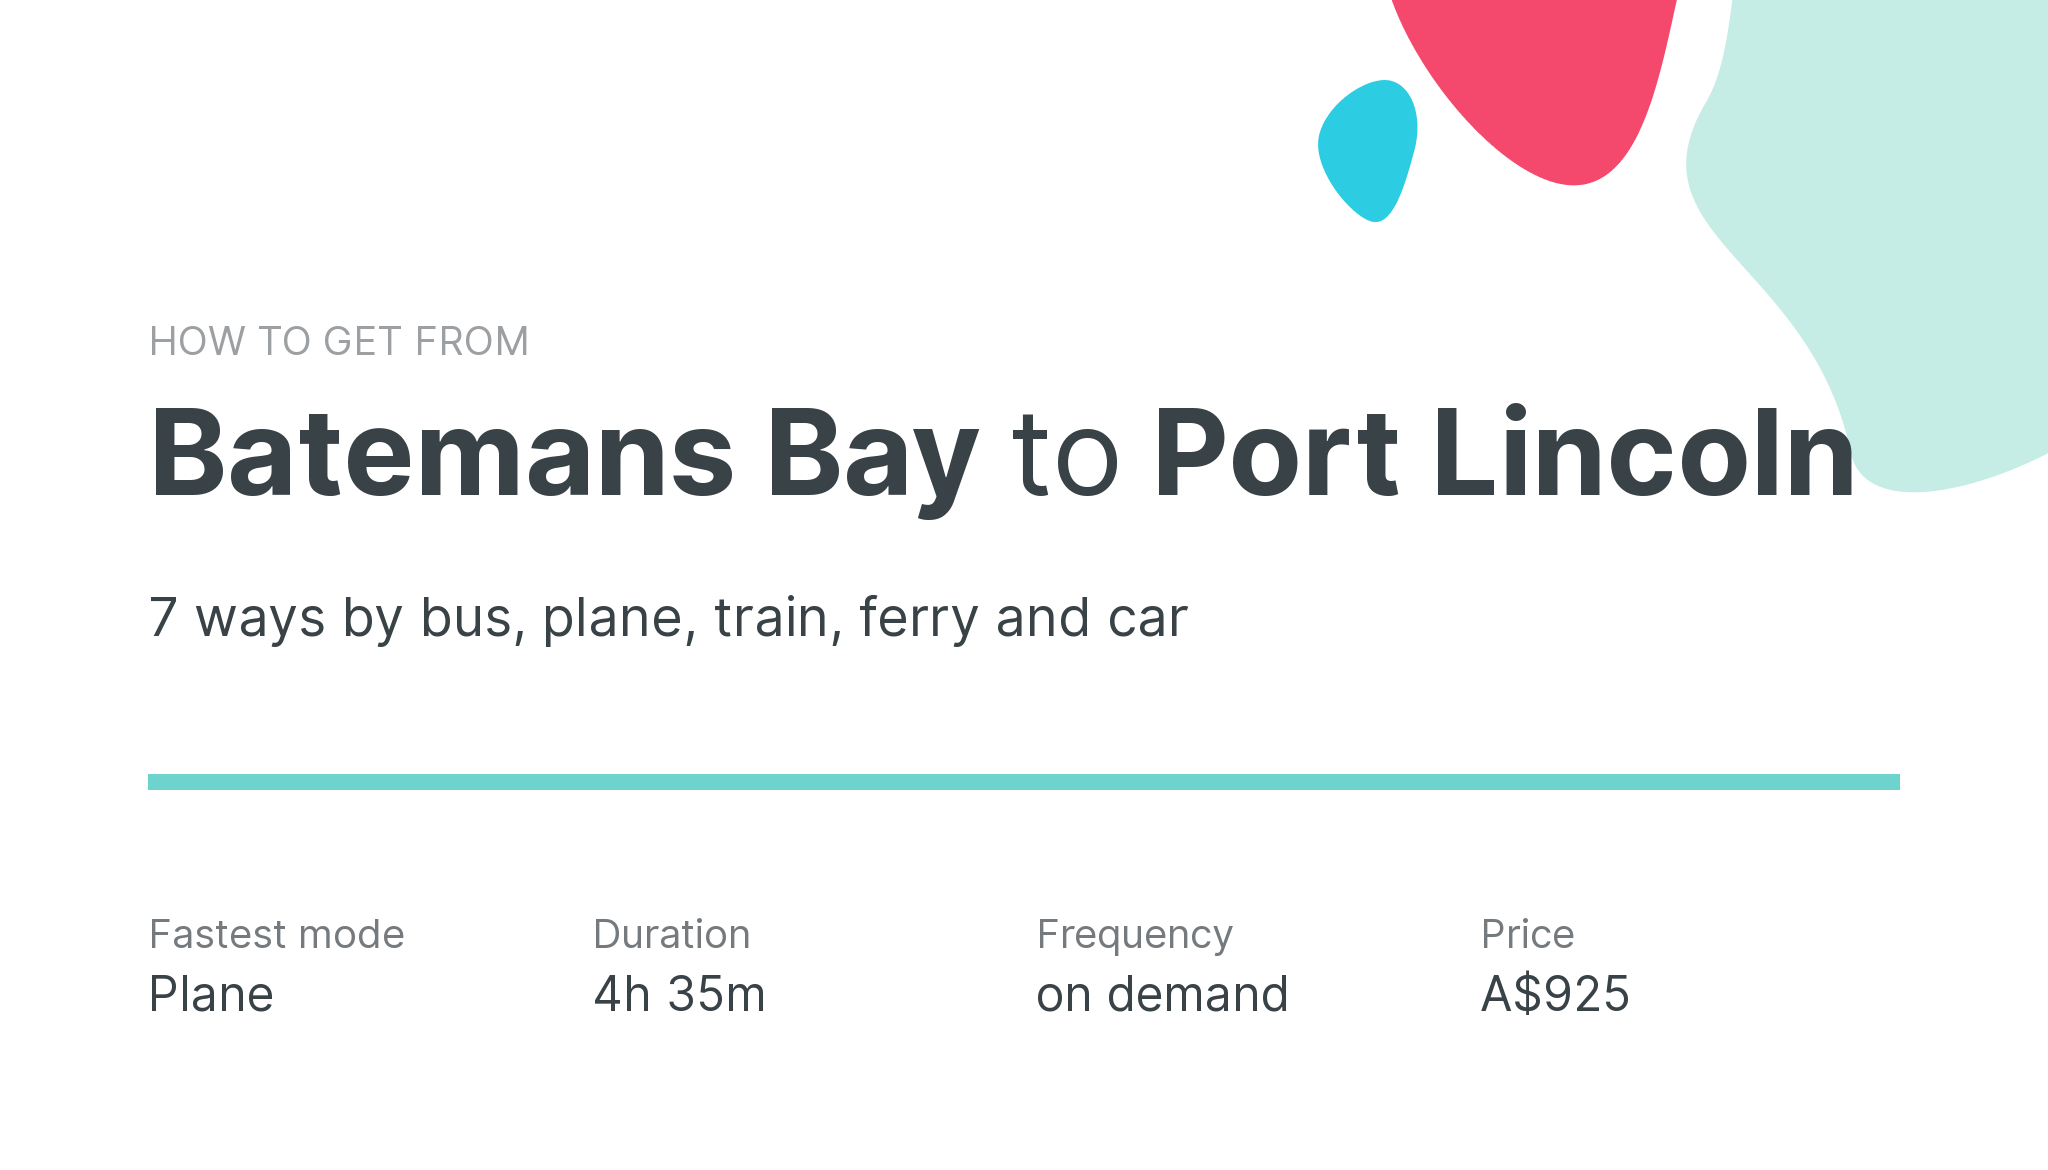 How do I get from Batemans Bay to Port Lincoln